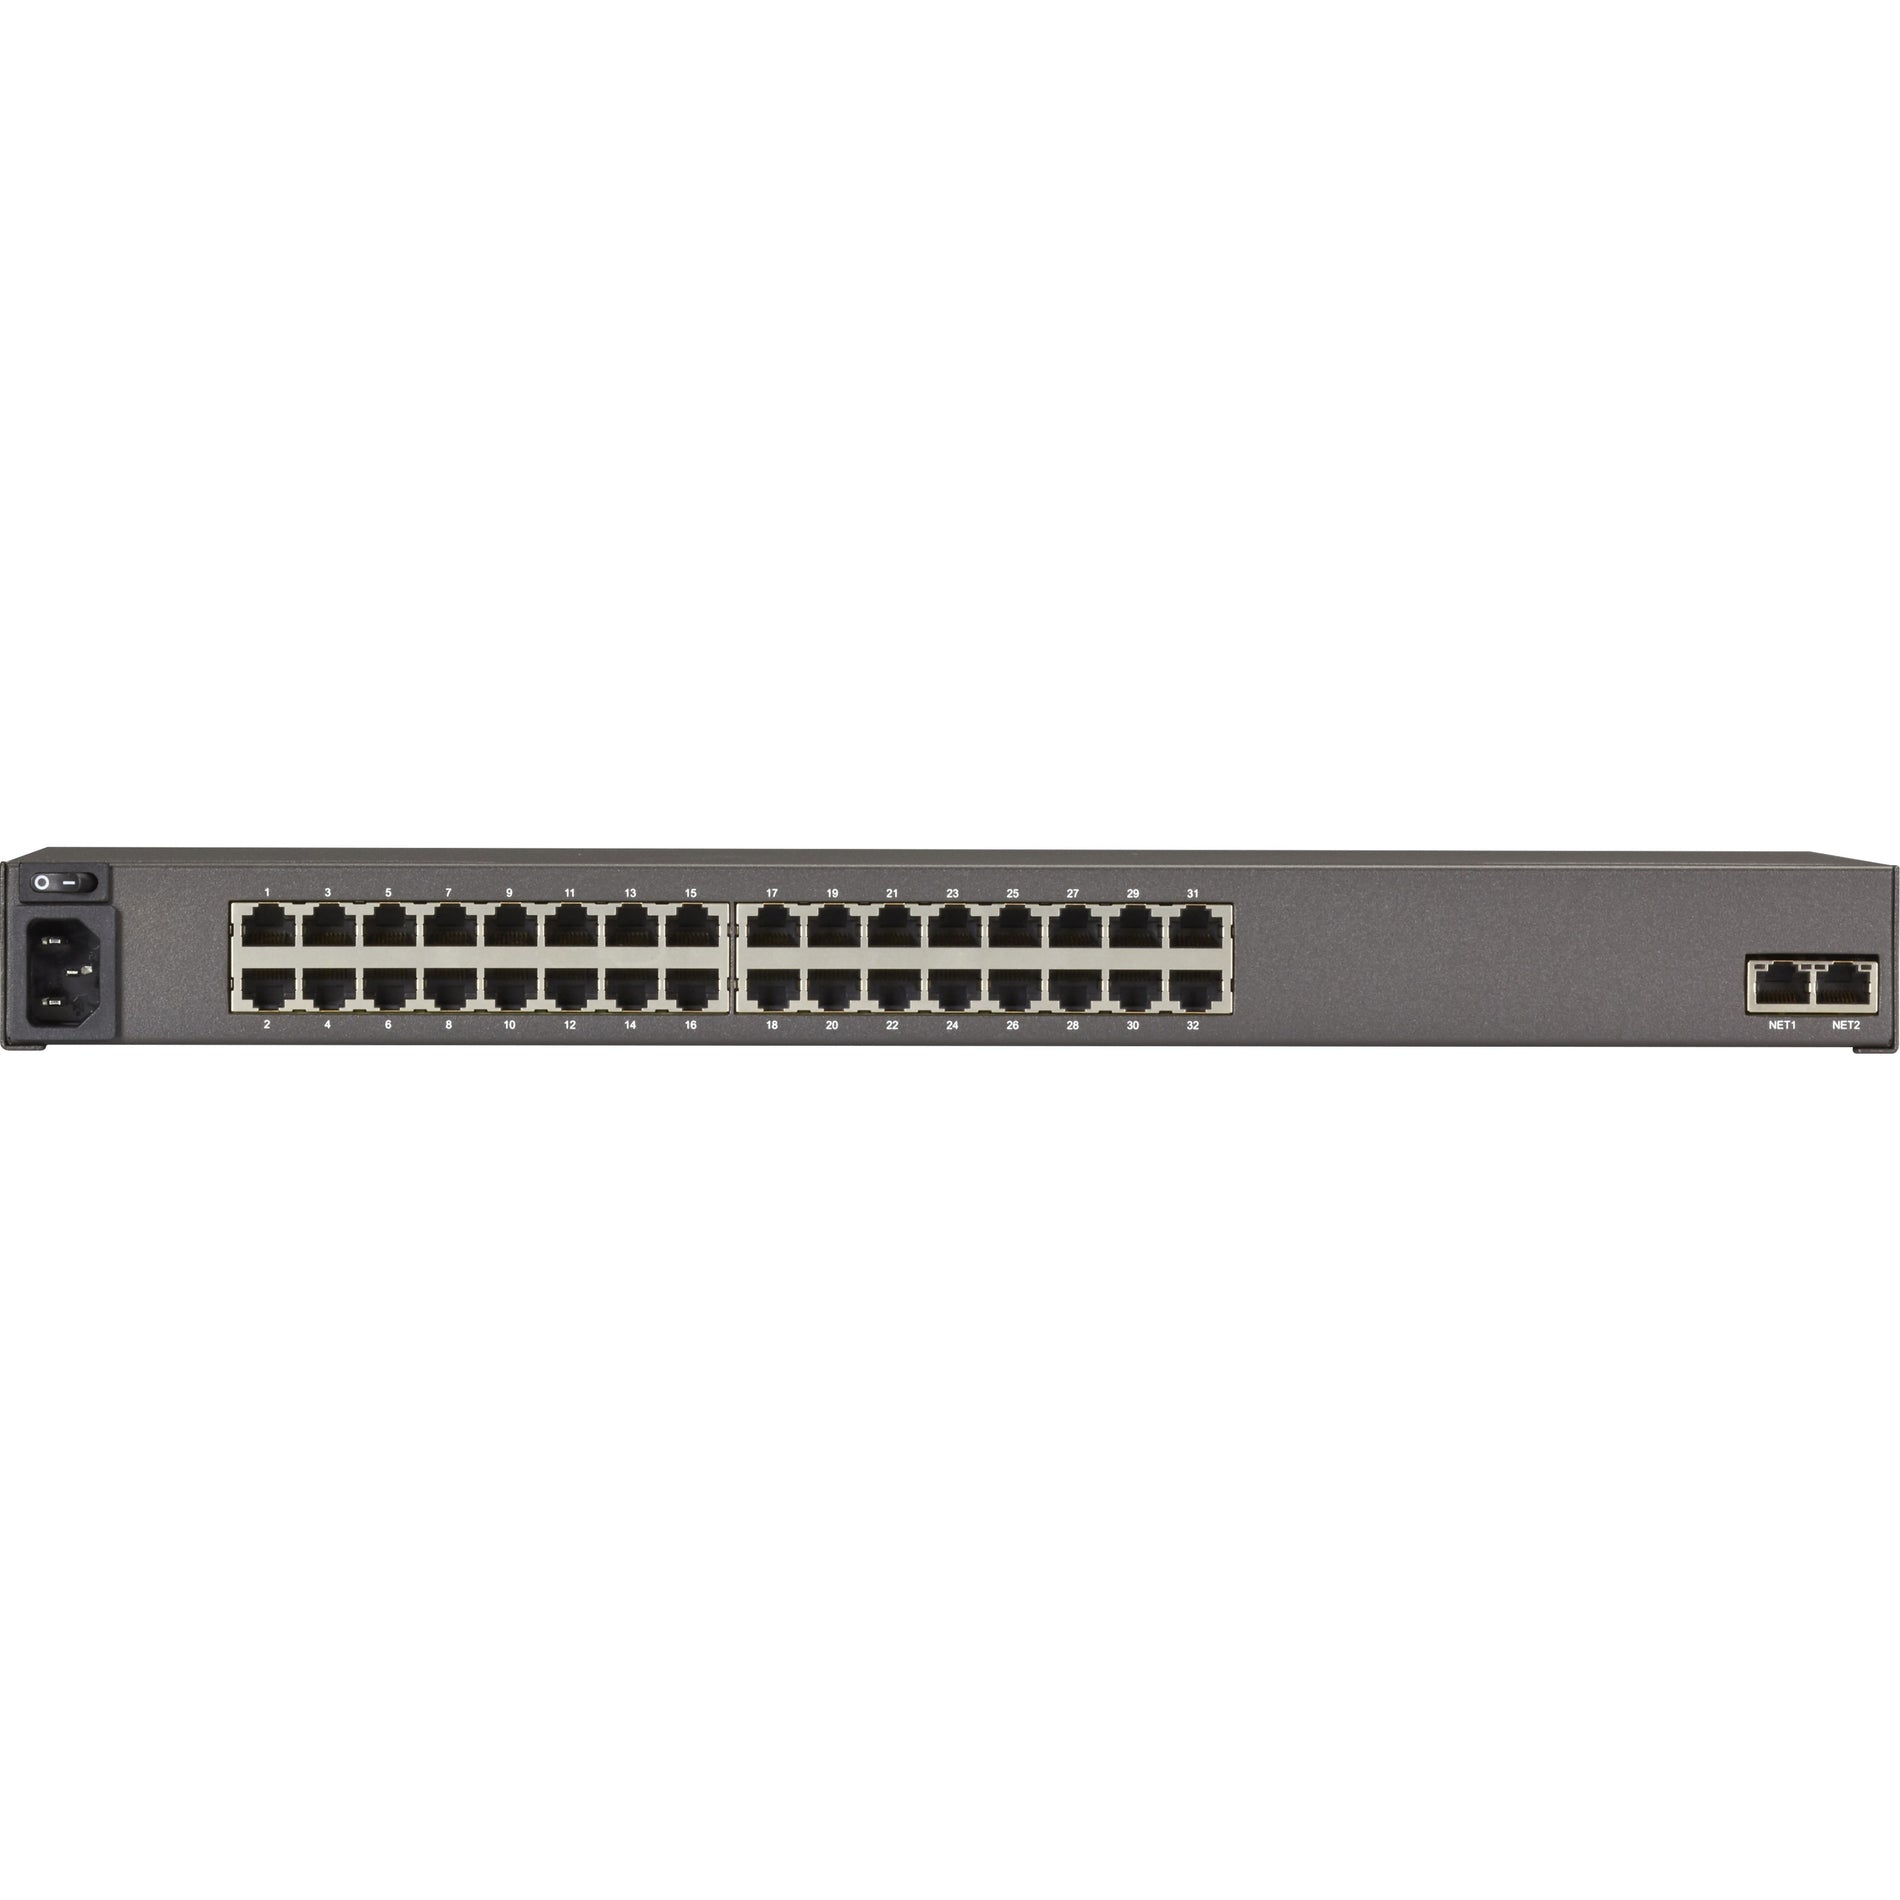 Black Box LES1532A LES1500 Device Server, 32-Port Secure Serial Server with Cisco Pinout, Rackmount brackets and hardware, 4 Year Limited Warranty